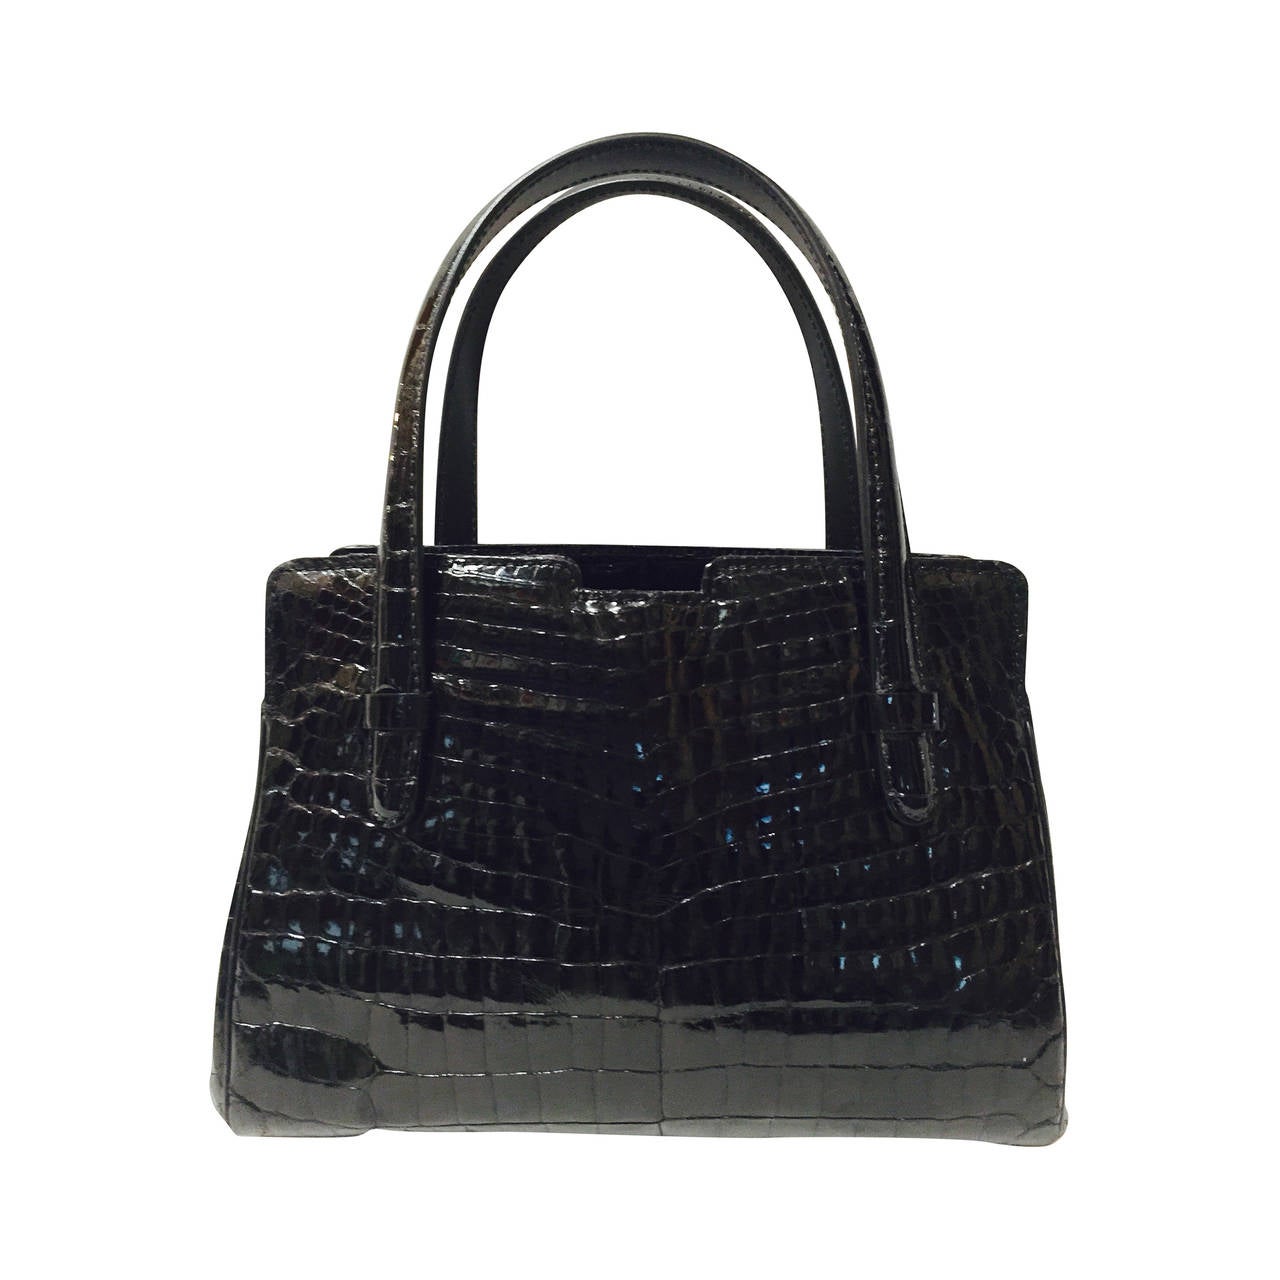 Luxurious 1950s Vintage Gucci Alligator Satchel With Crystals at 1stdibs